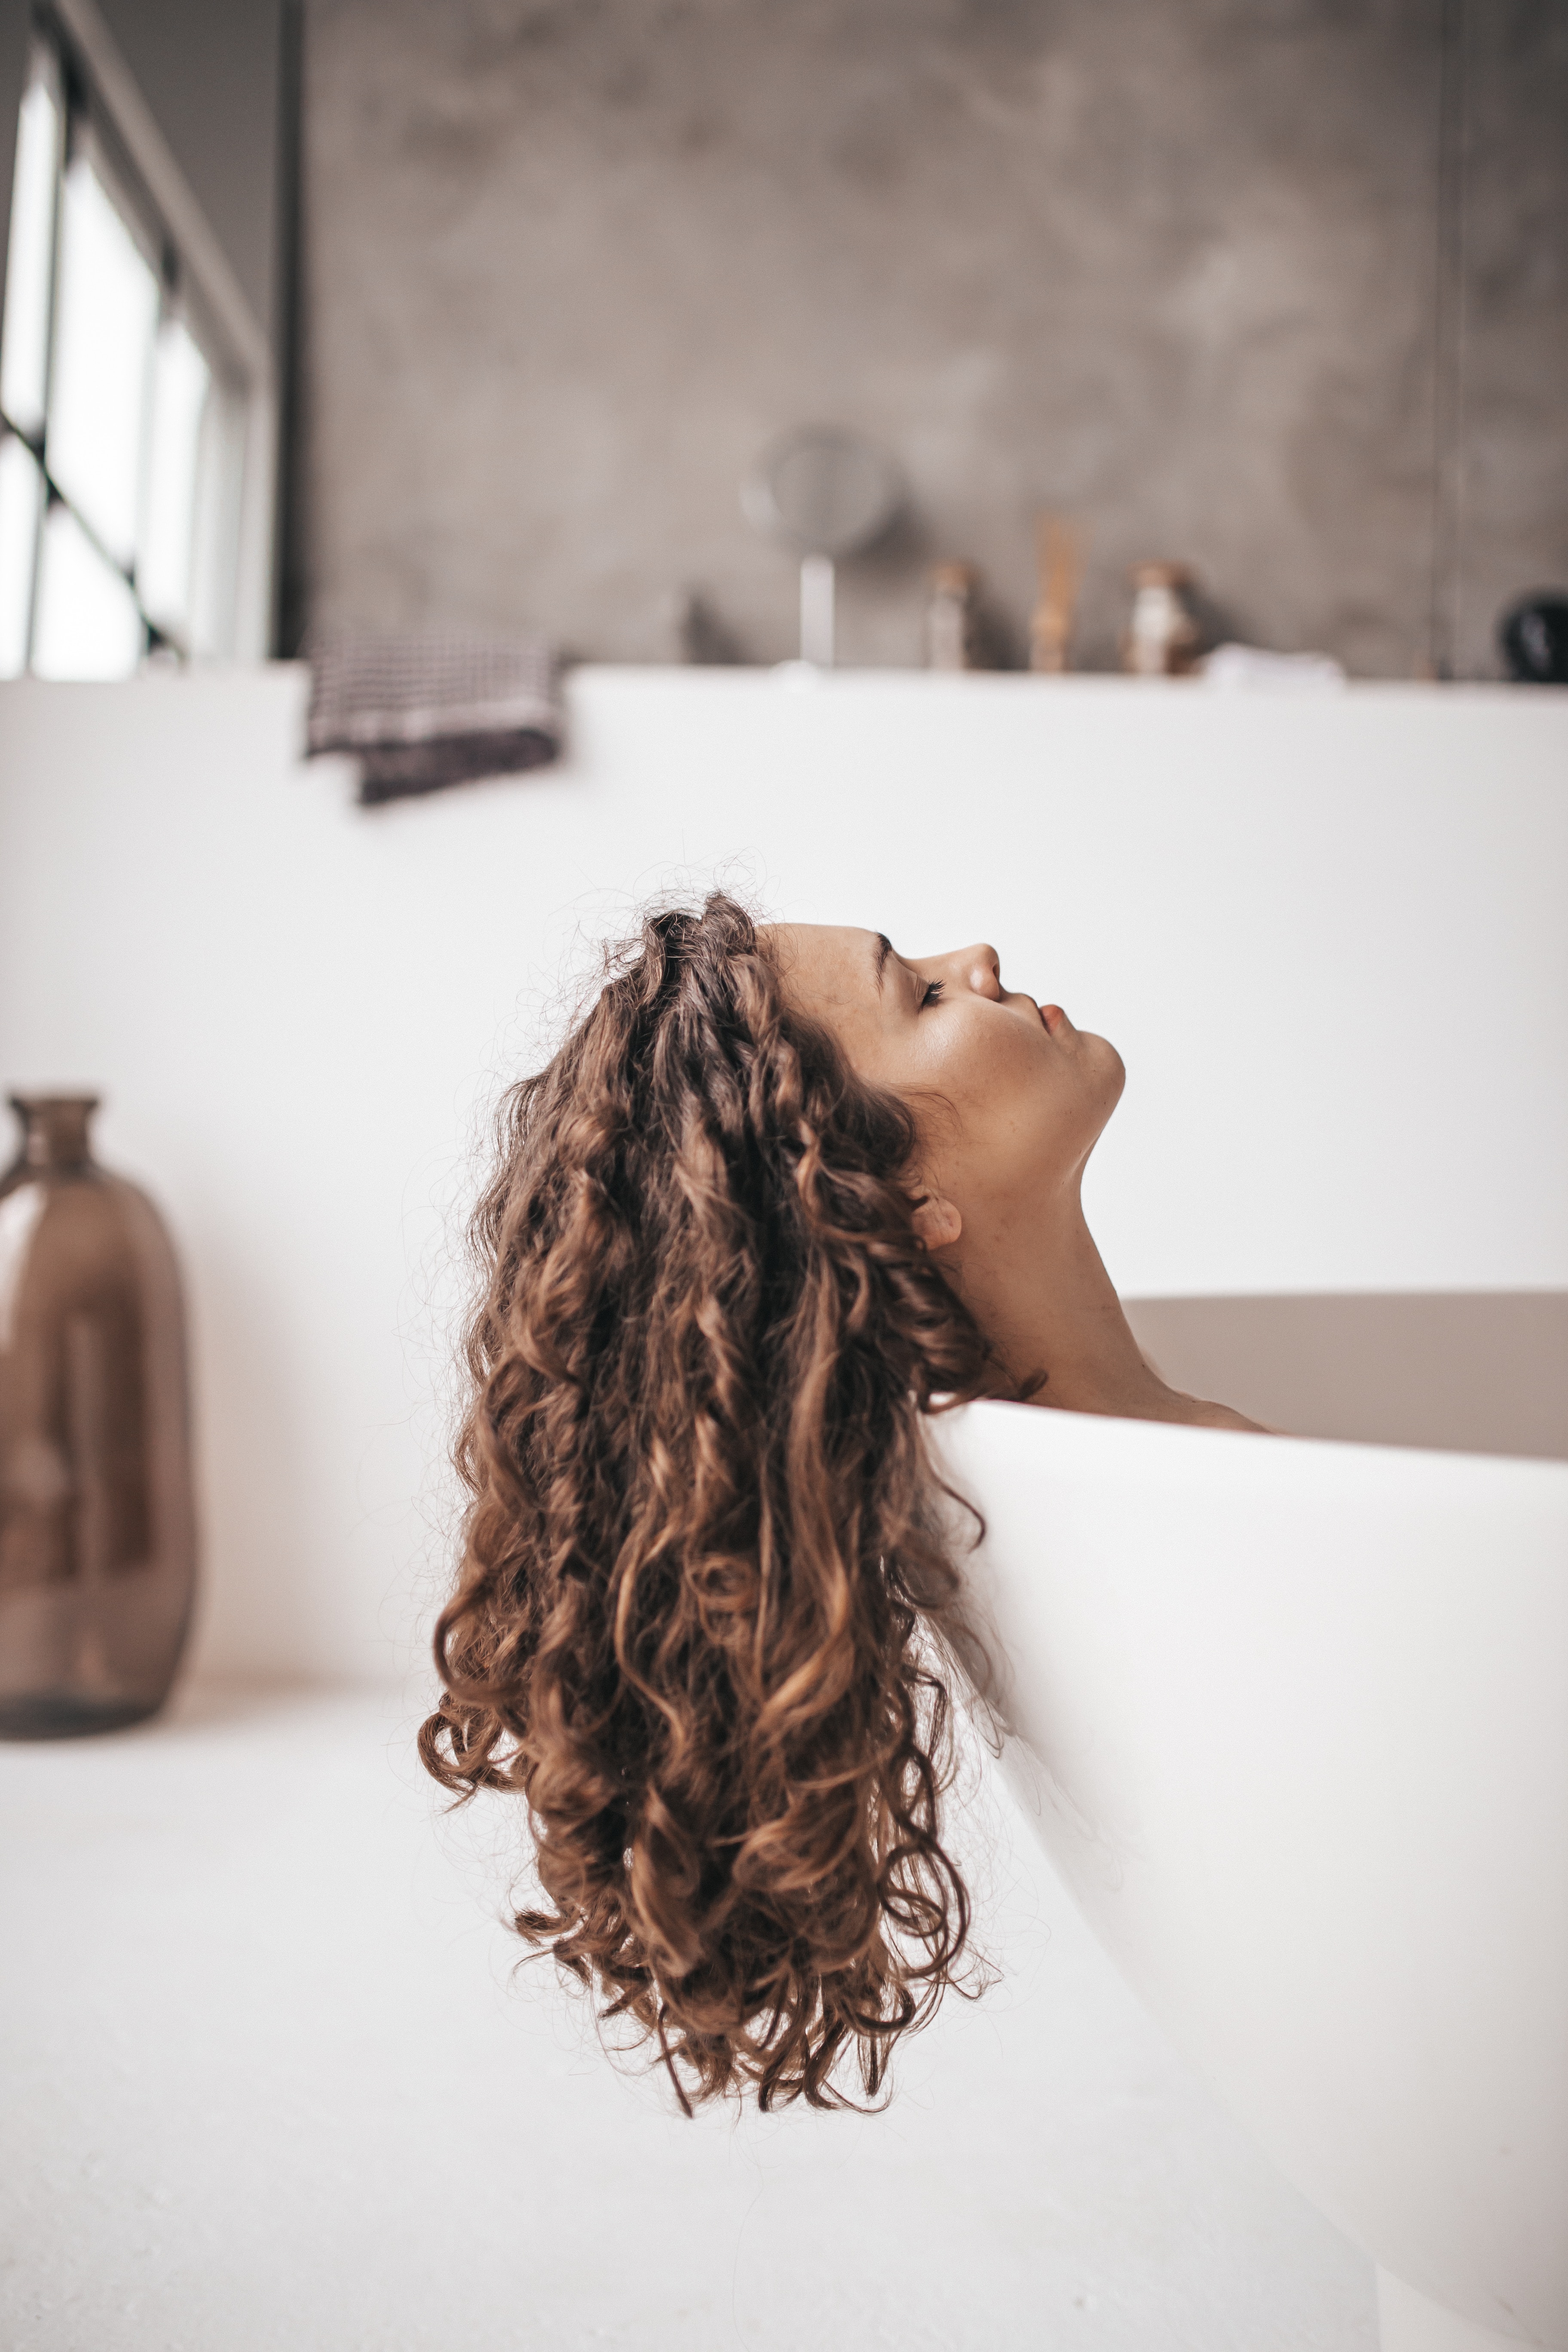 Woman reclines in a bathtub with long curly brown hair hanging down outside the tub